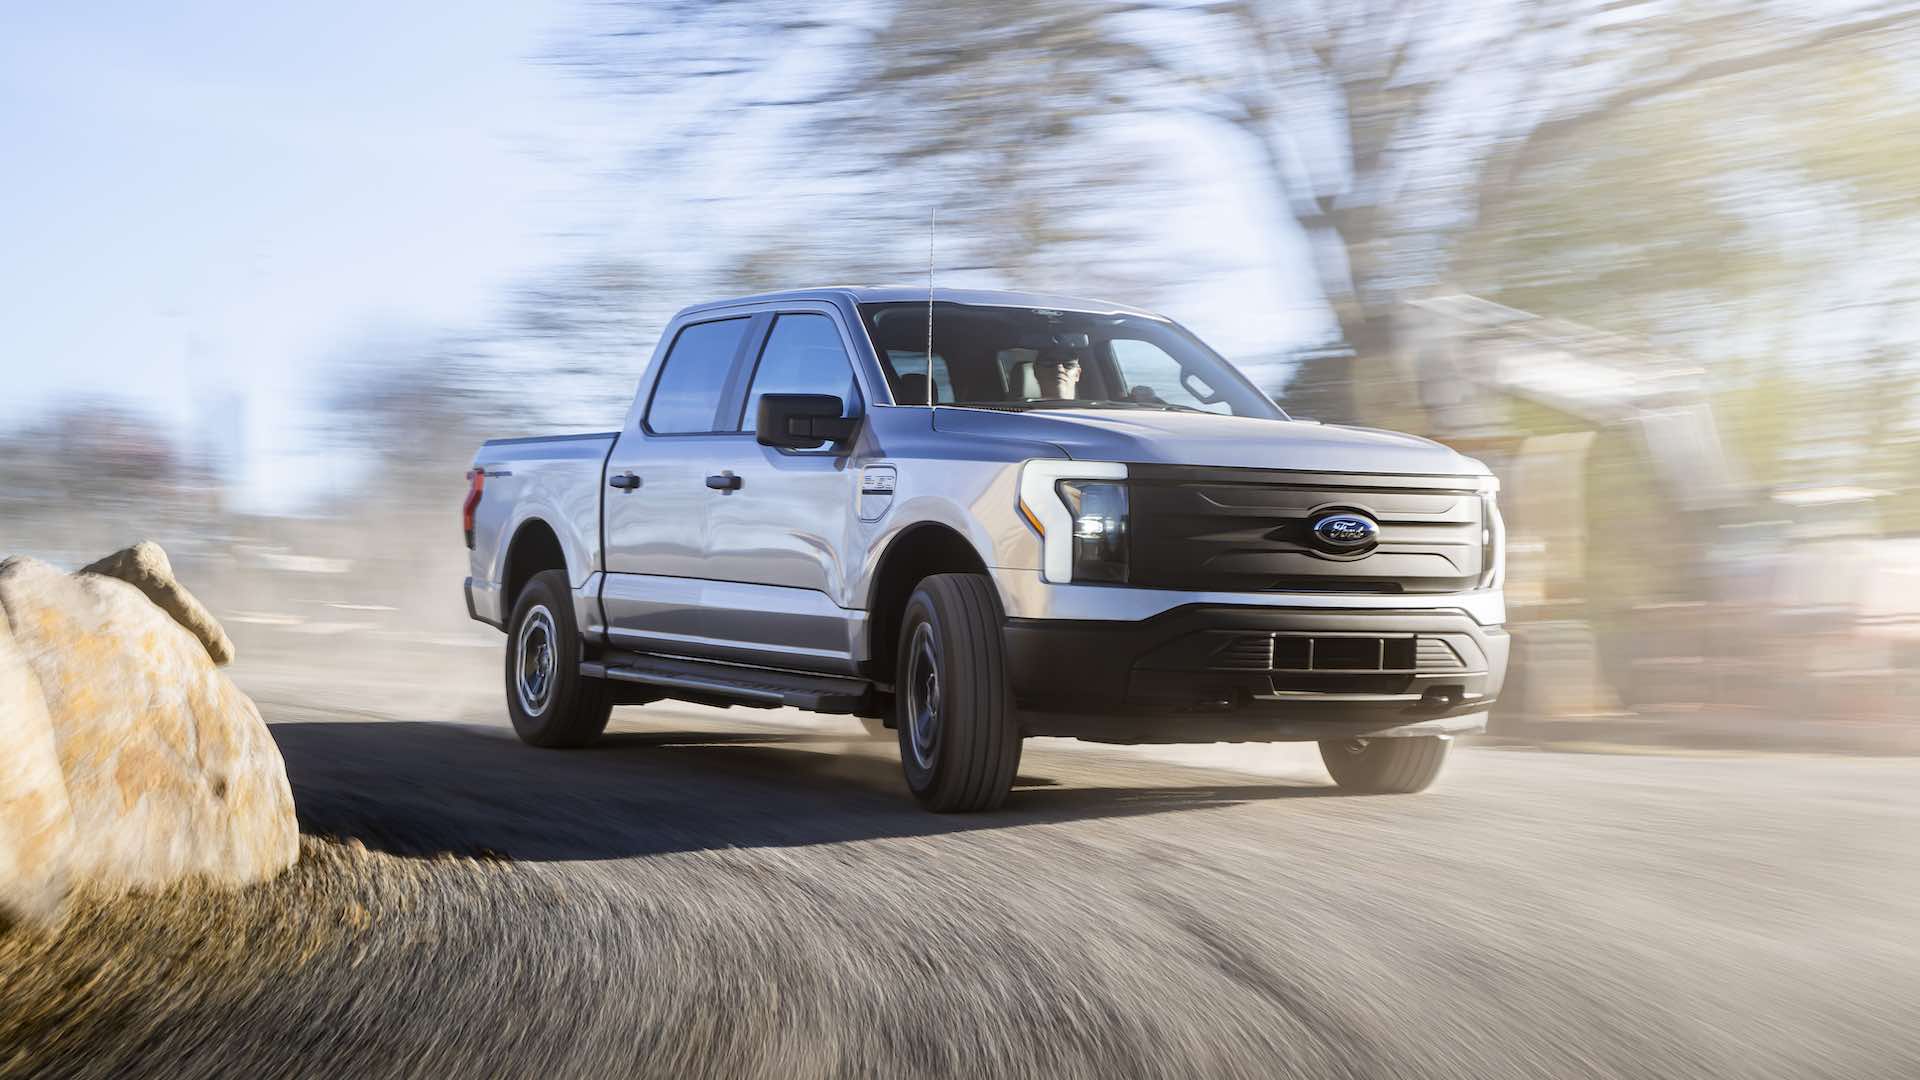 Ford announces recall of 870,000 F-150 trucks over parking brake concerns